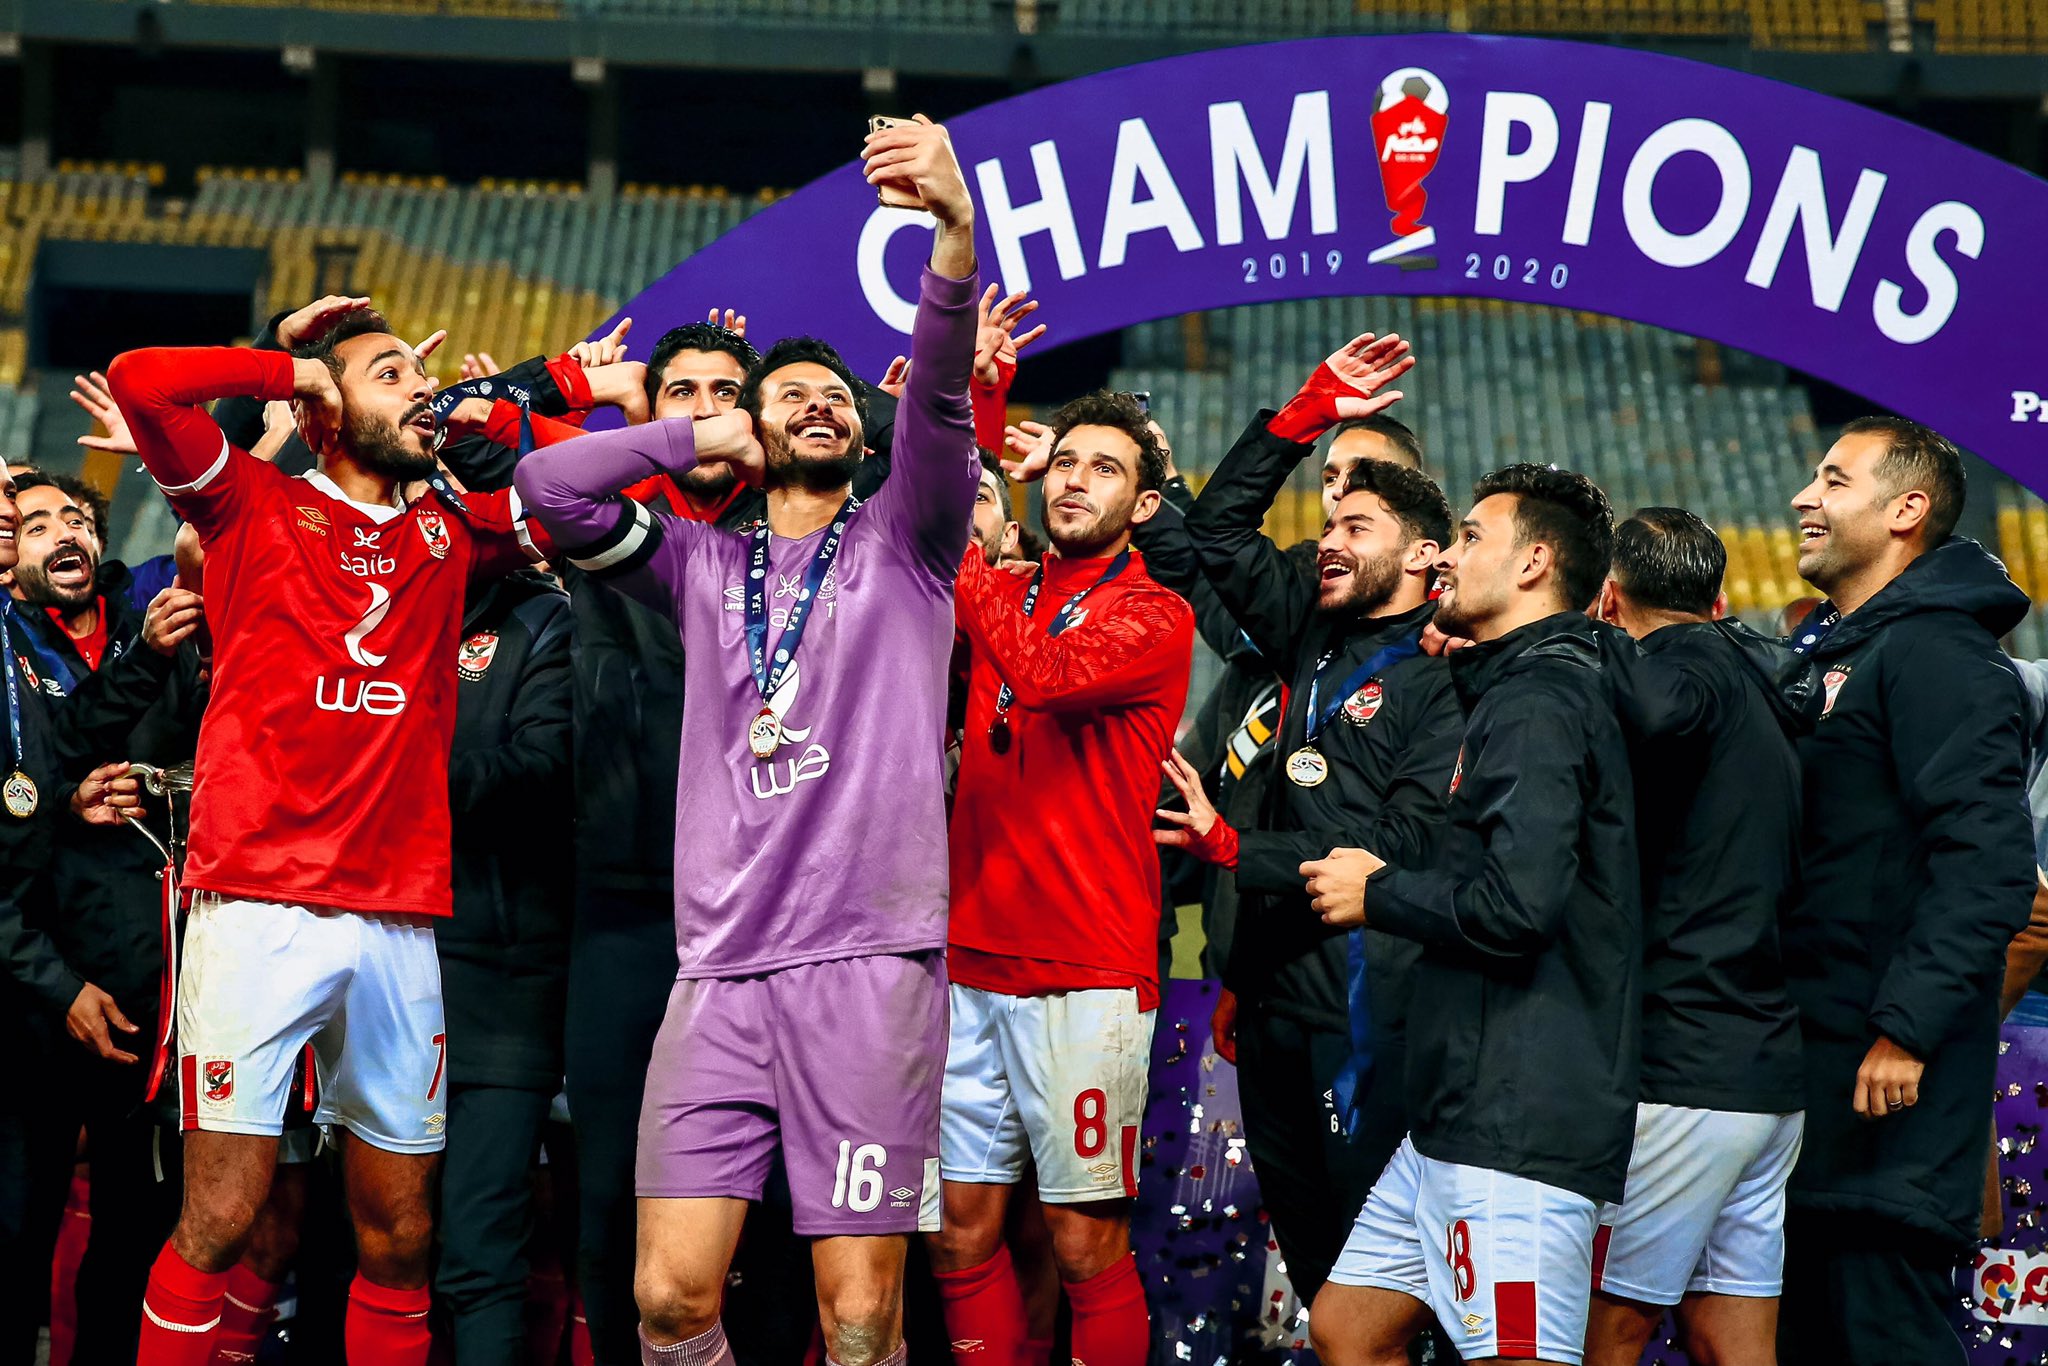 A memento from a momentous occasion. 🎞️ #ClubWC #AlAhly #ElShenawy, Al  Ahly SC